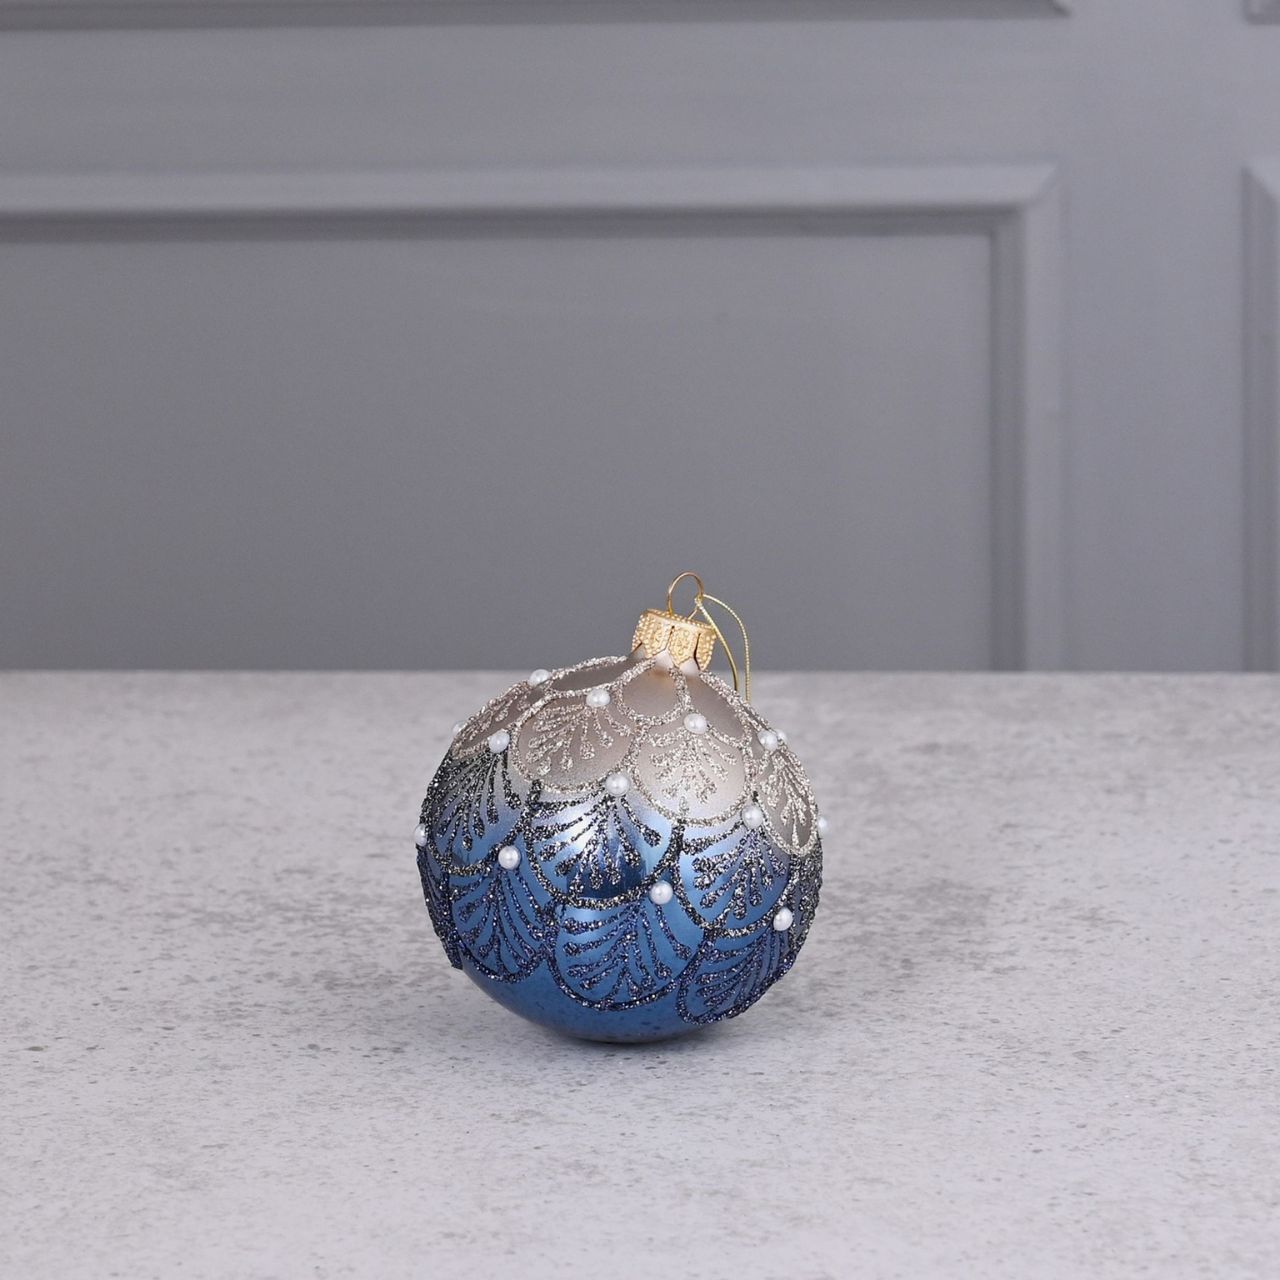 Celestial Blue Crystal Hand Decorated Ornamental Bauble  A blue hand decorated crystal bauble from THE SEASONAL GIFT CO.  This ornate Christmas bauble holds an abundance of elegance and will stand out amongst the tree branches this festive season.